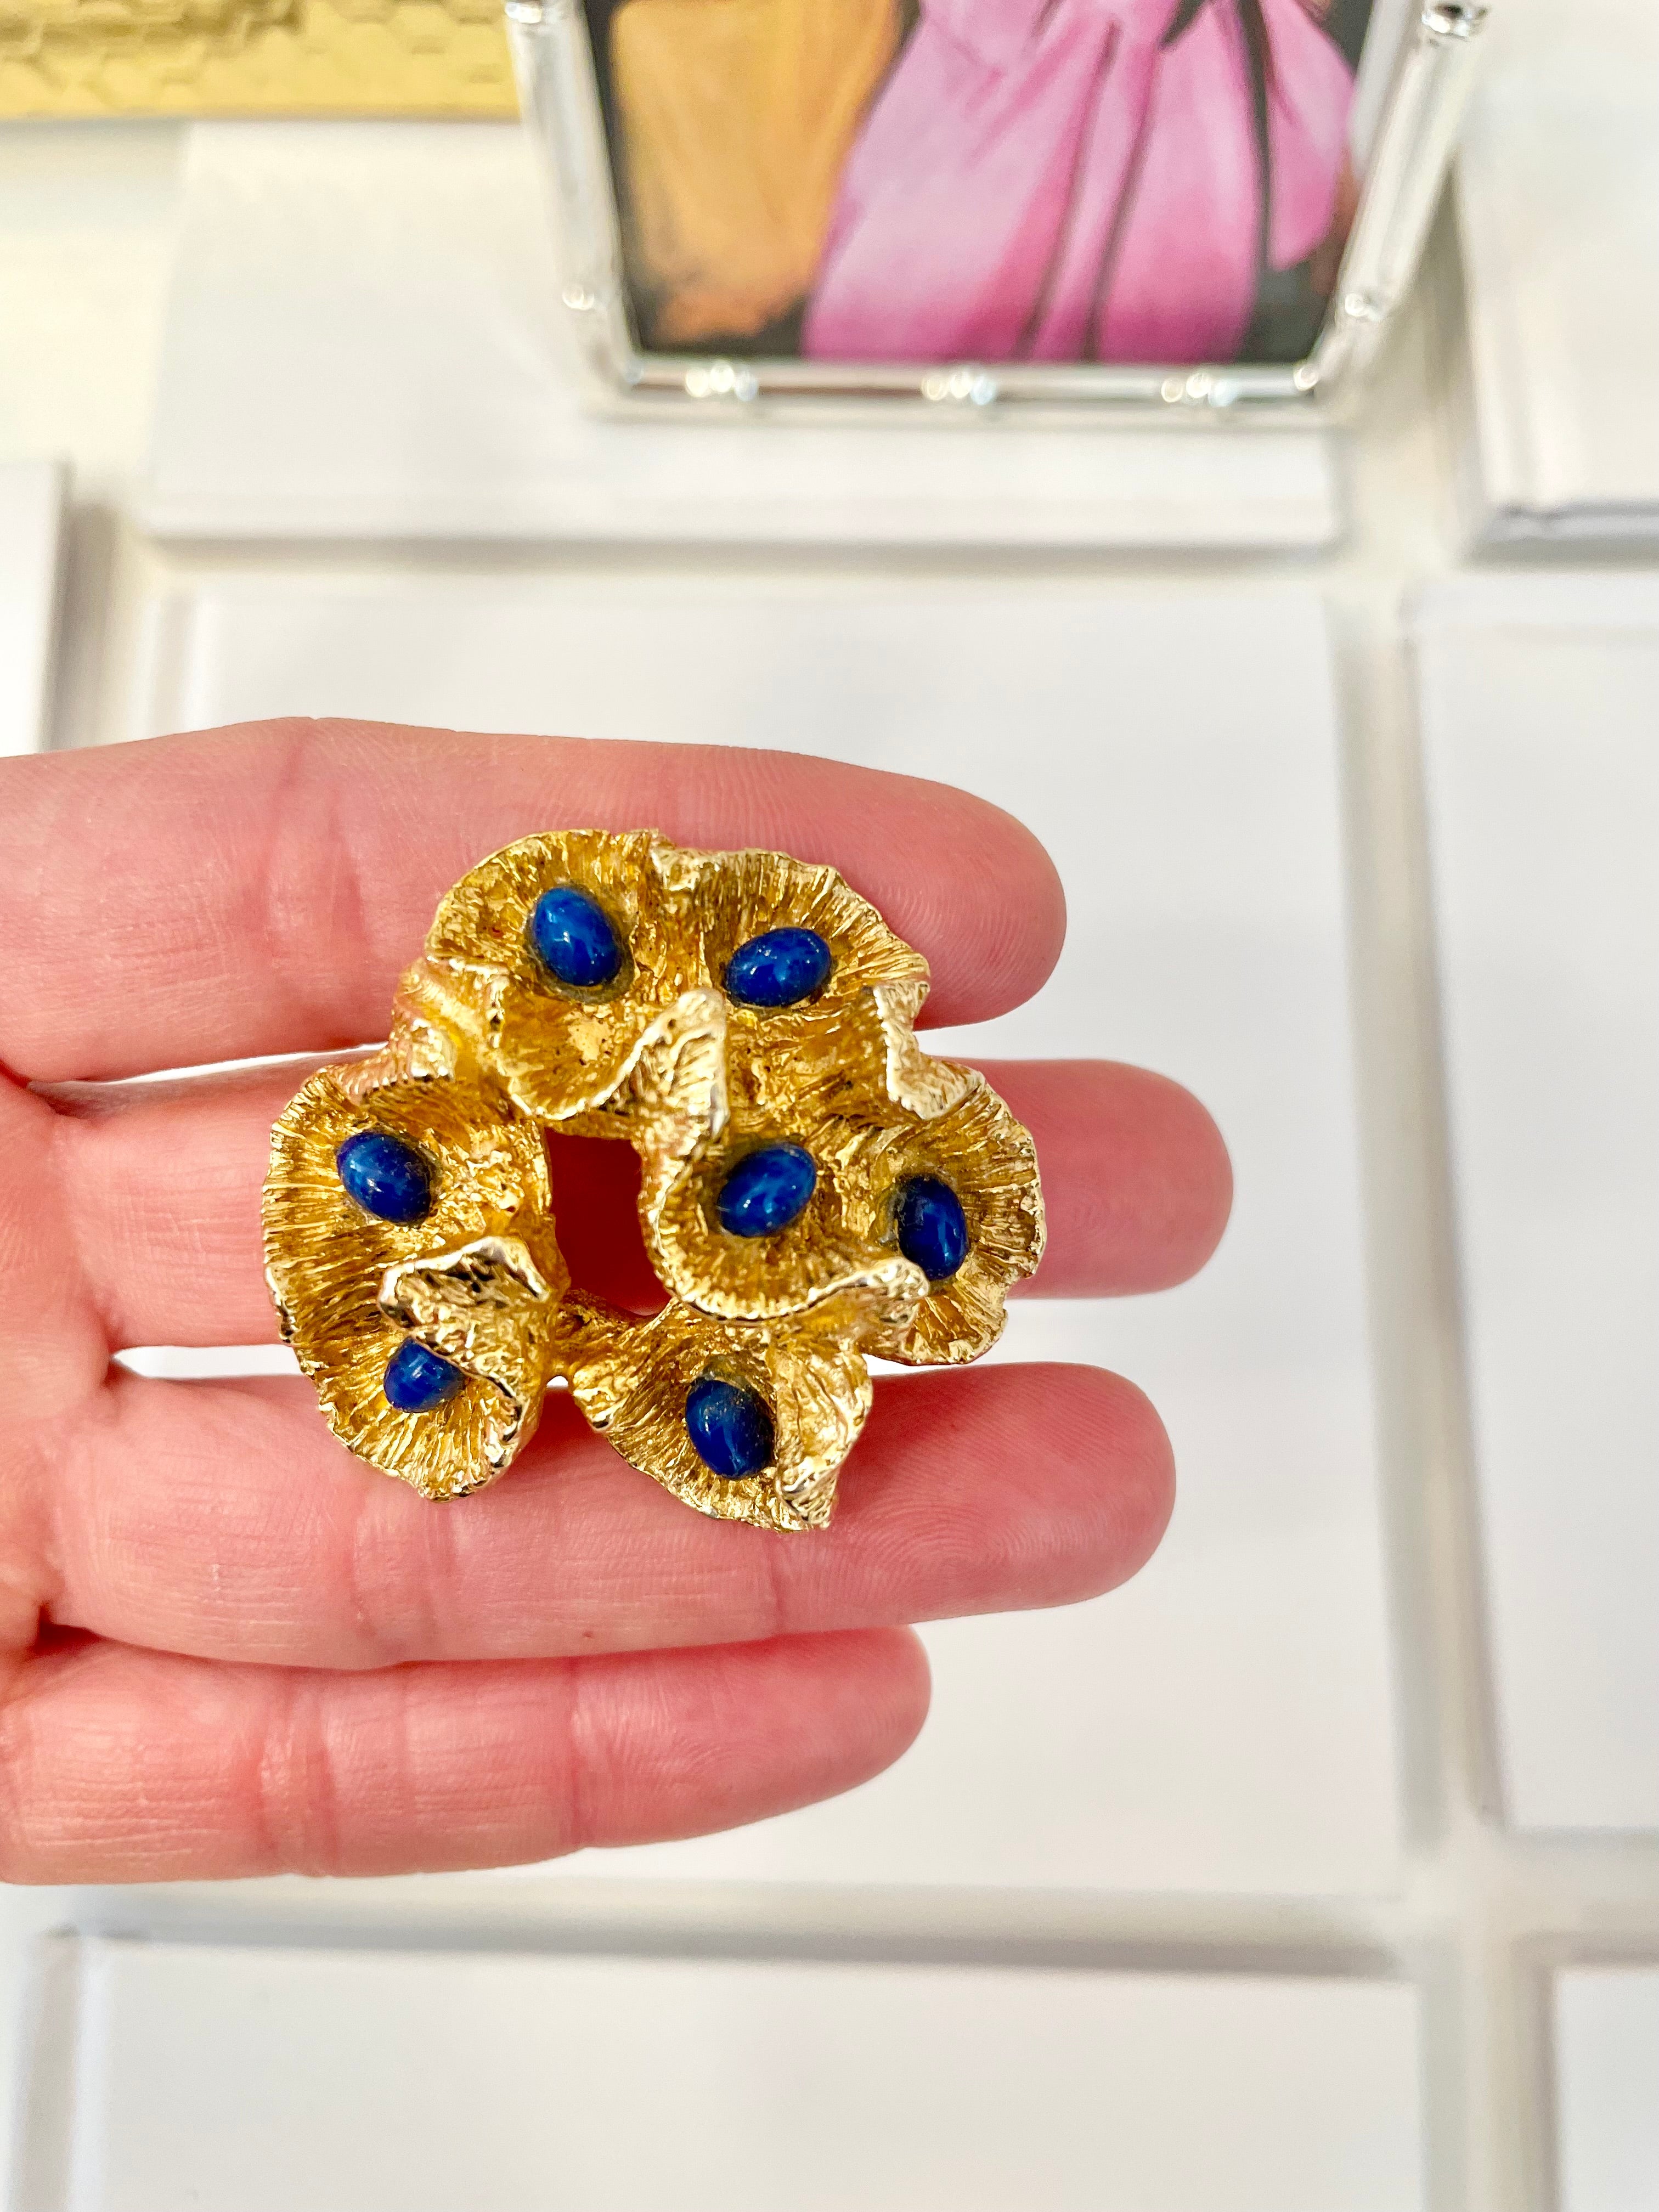 The most chic sculpted gold brooch with faux lapis stones.... so brilliant!